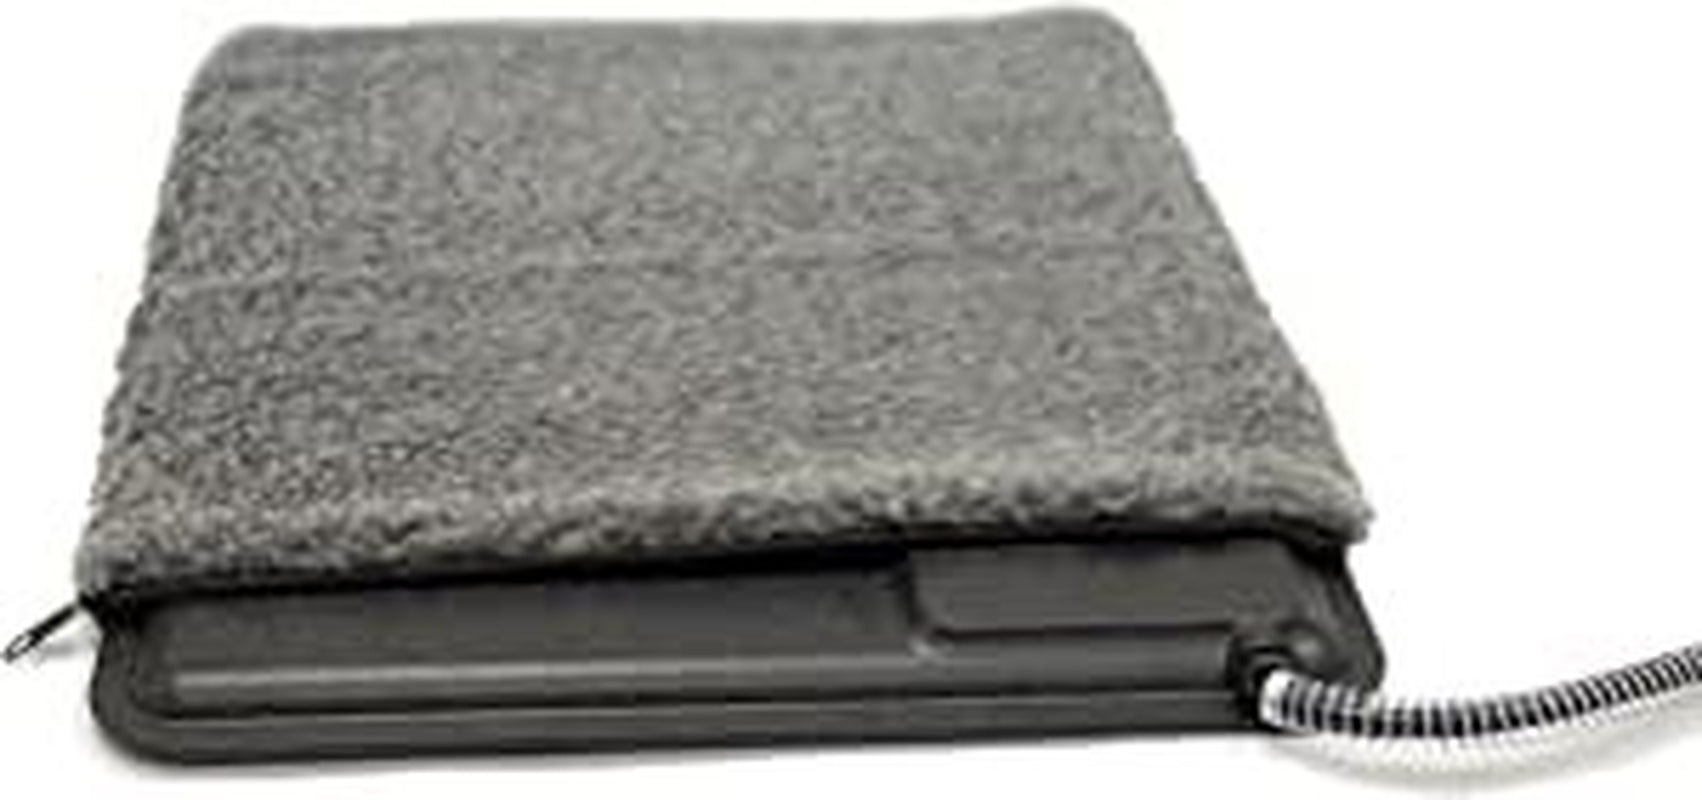 Heated Original Lectro-Kennel Outdoor Pad with Deluxe Cover, Small 12.5 X 18.5 X 0.5 Inches